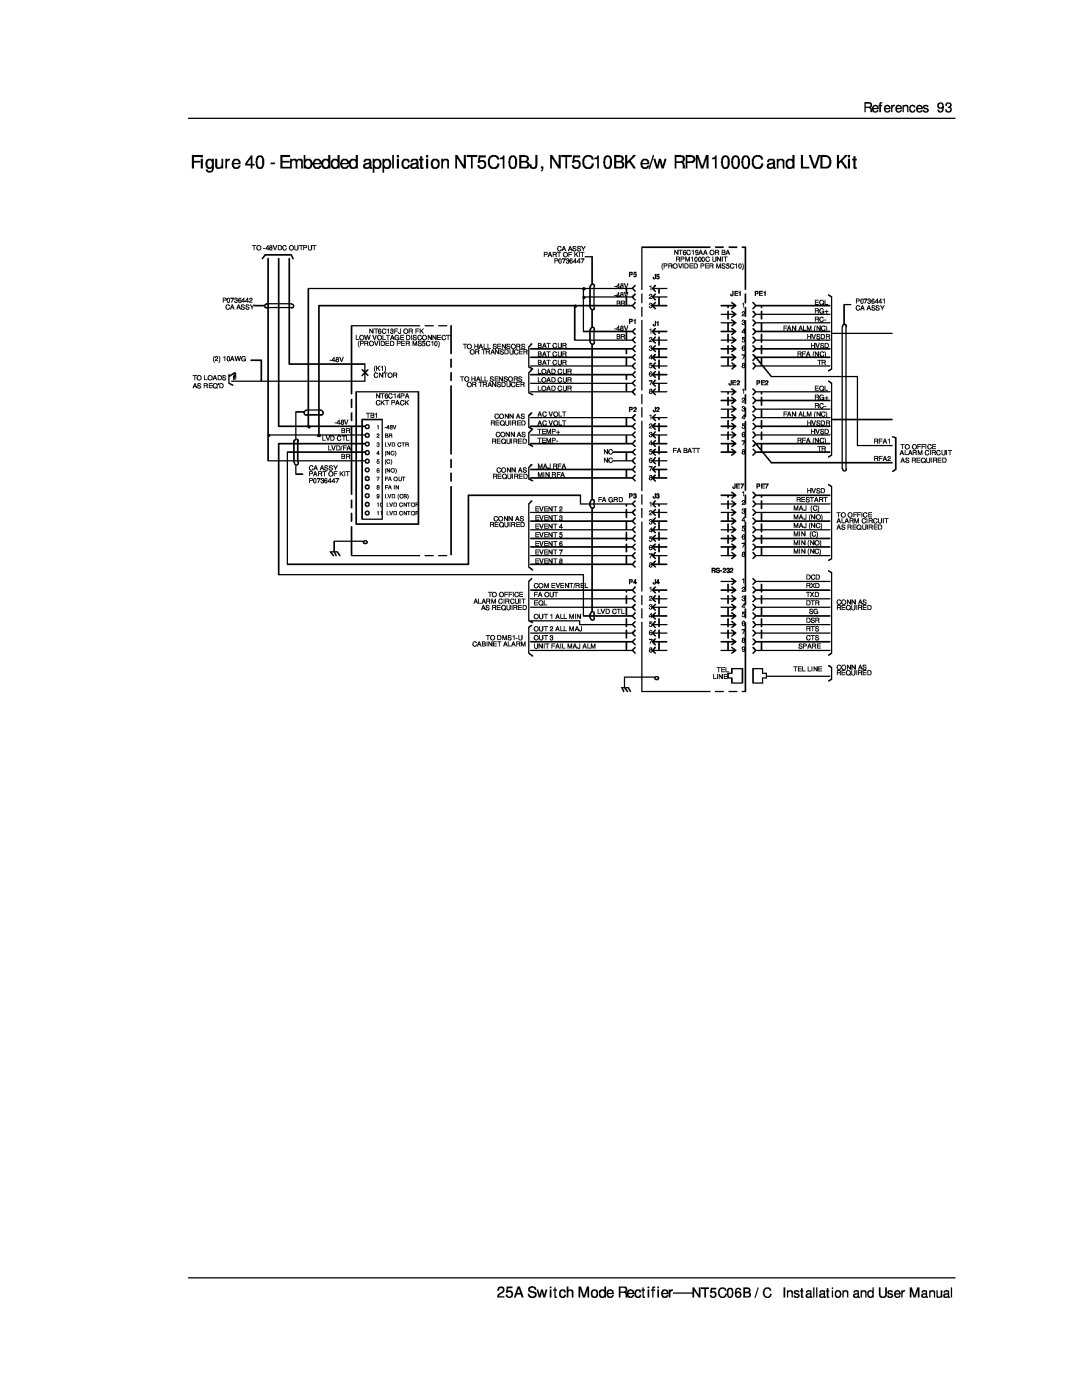 Emerson MPR25, MPR15 Series user manual References, 25A Switch Mode Rectifier NT5C06B / C Installation and User Manual 